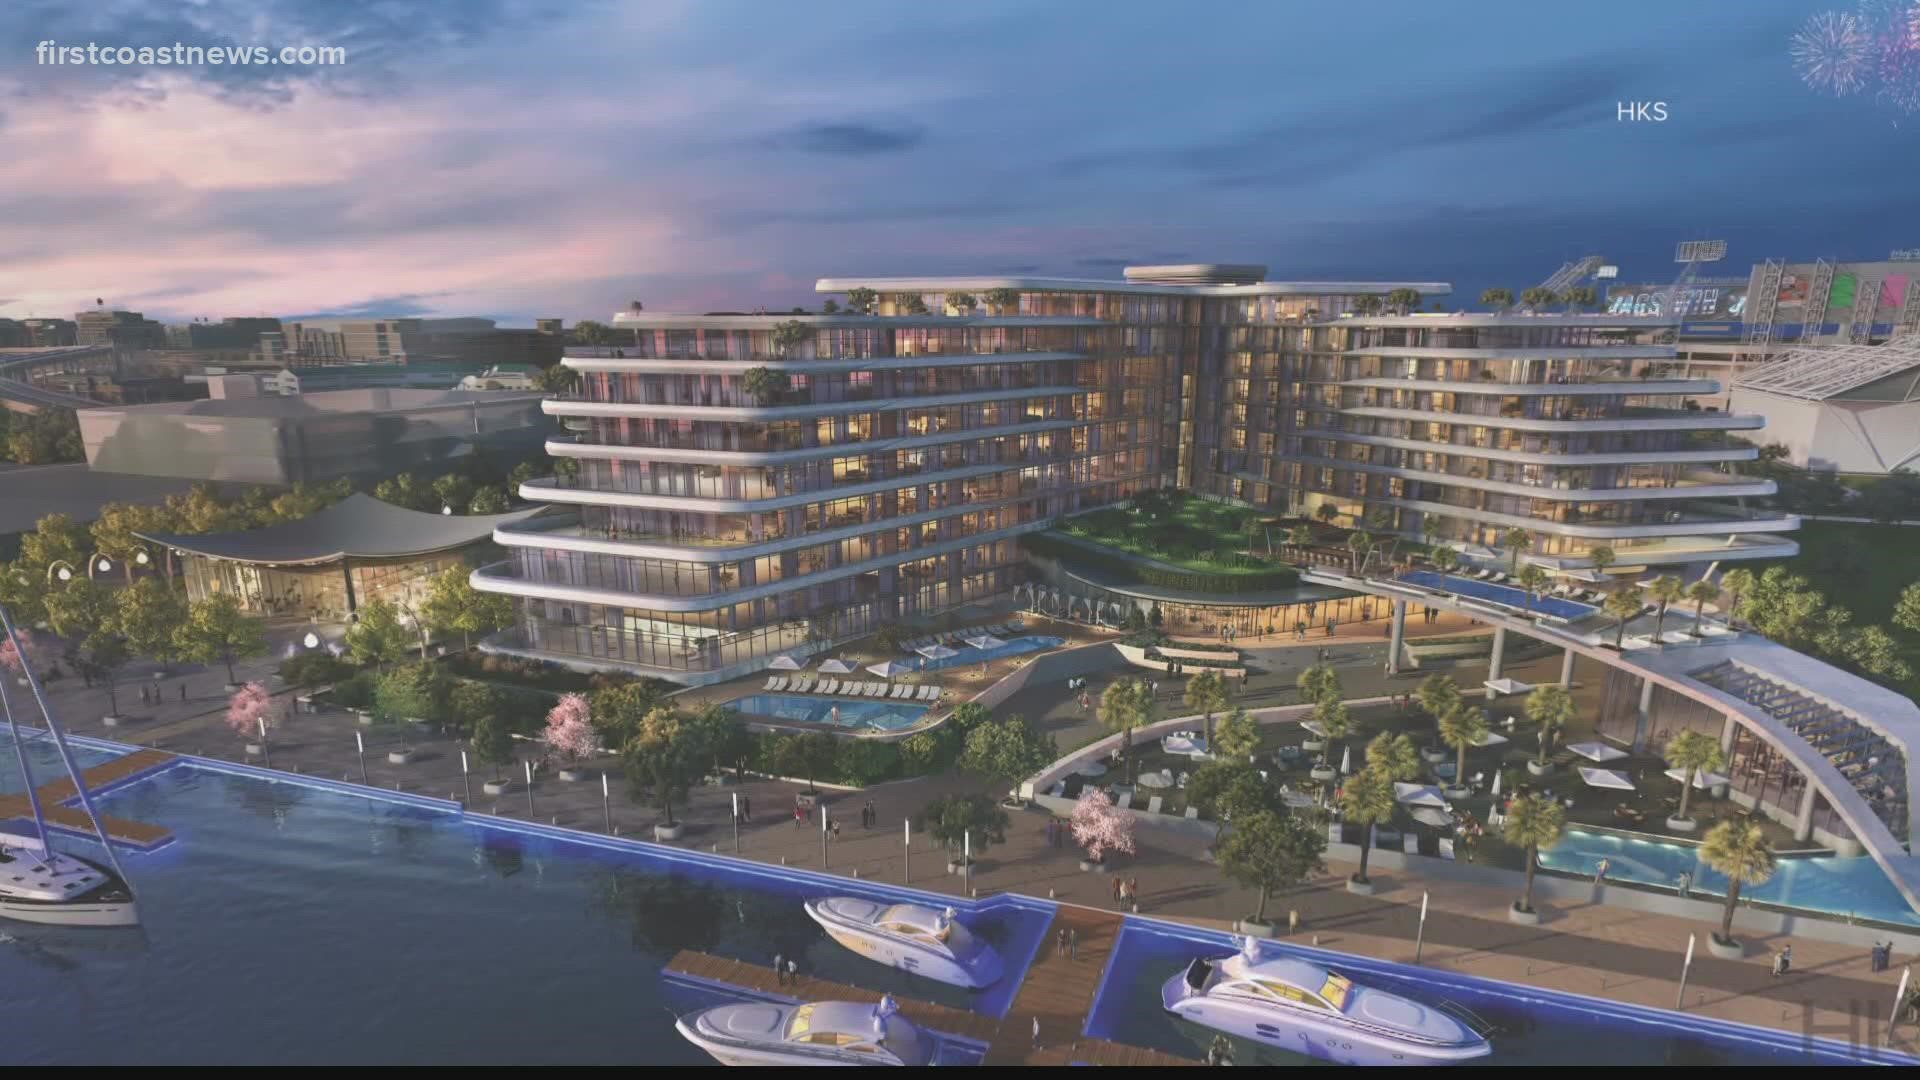 The development would include a luxury hotel, condos and a six-story office building.